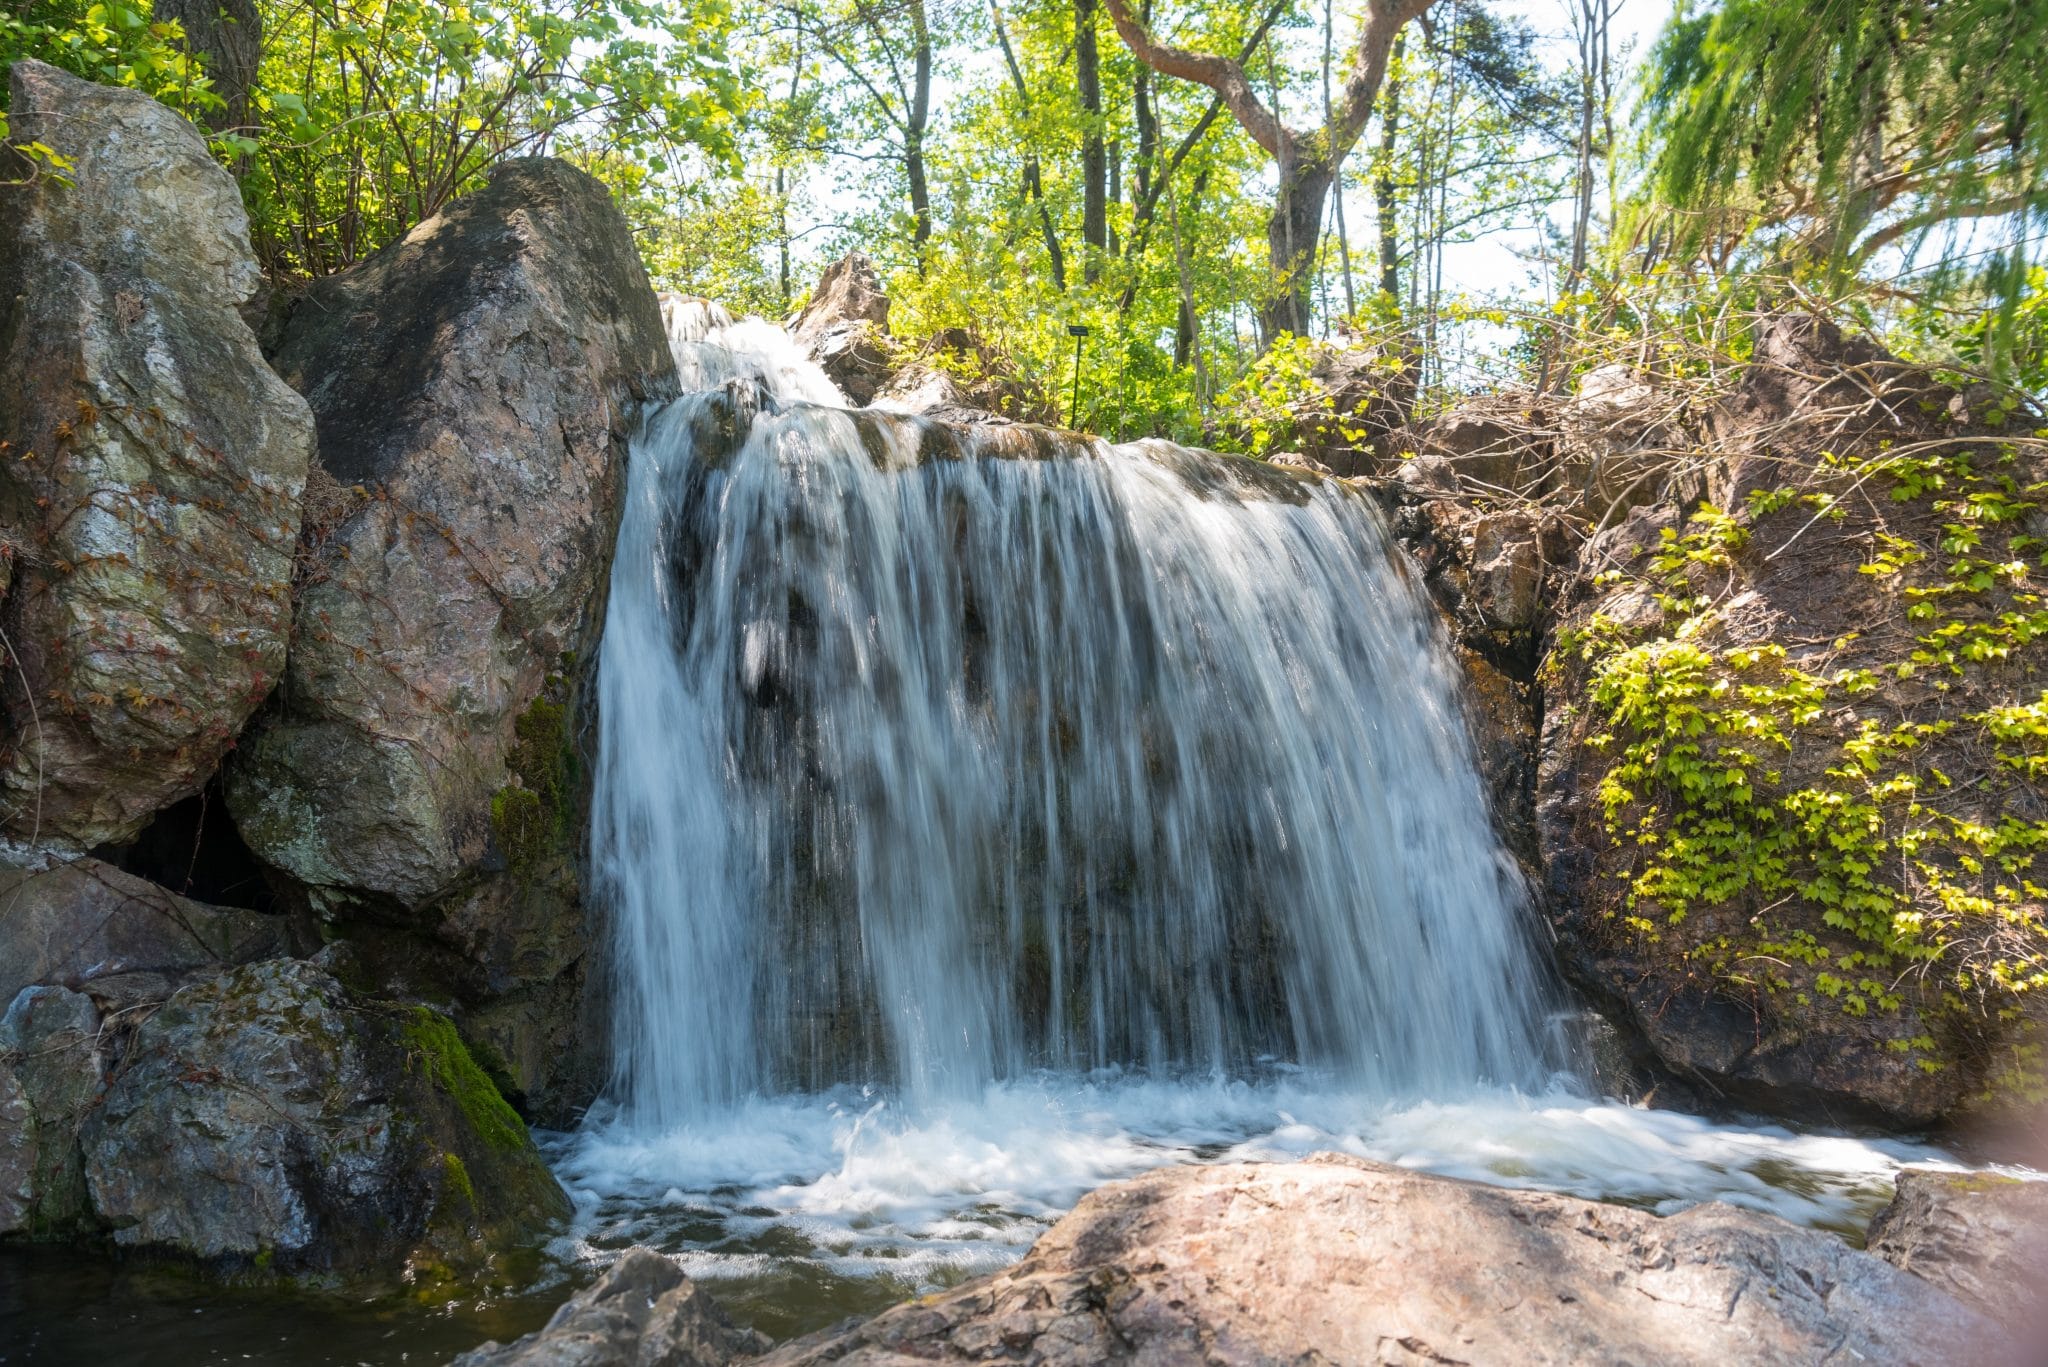 Image of a waterfall in the Chicago Botanic Garden in Chicago